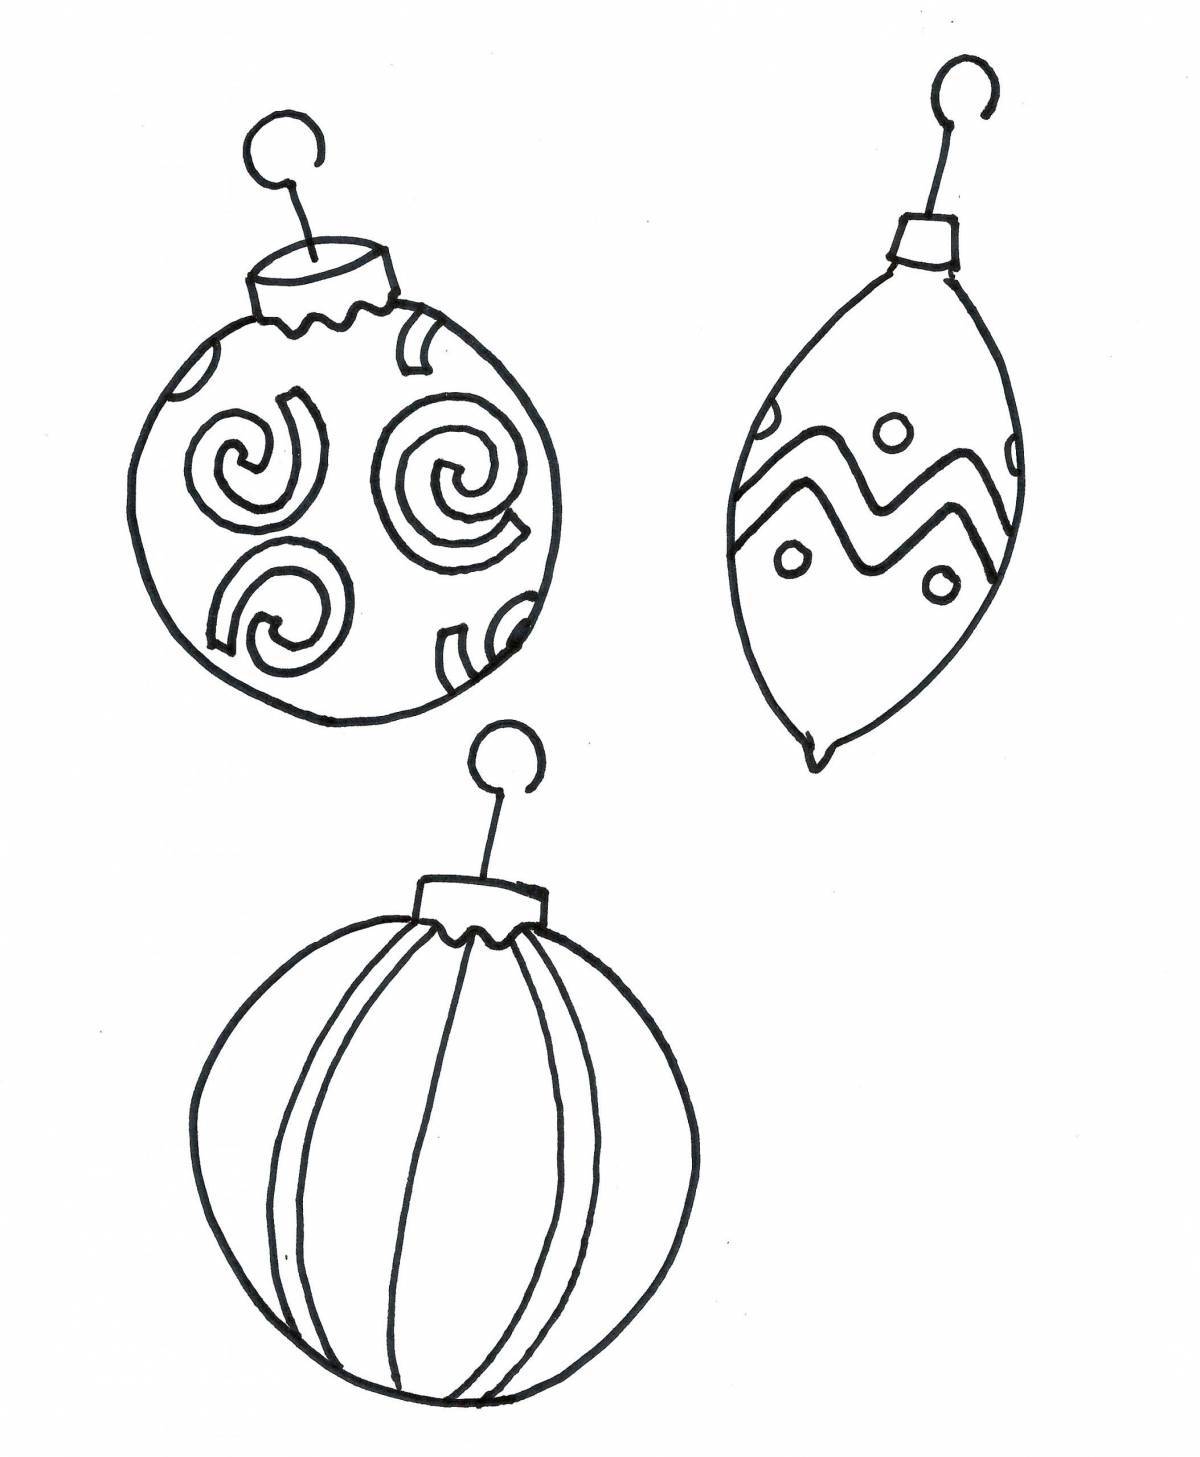 Gorgeous Christmas tree coloring page